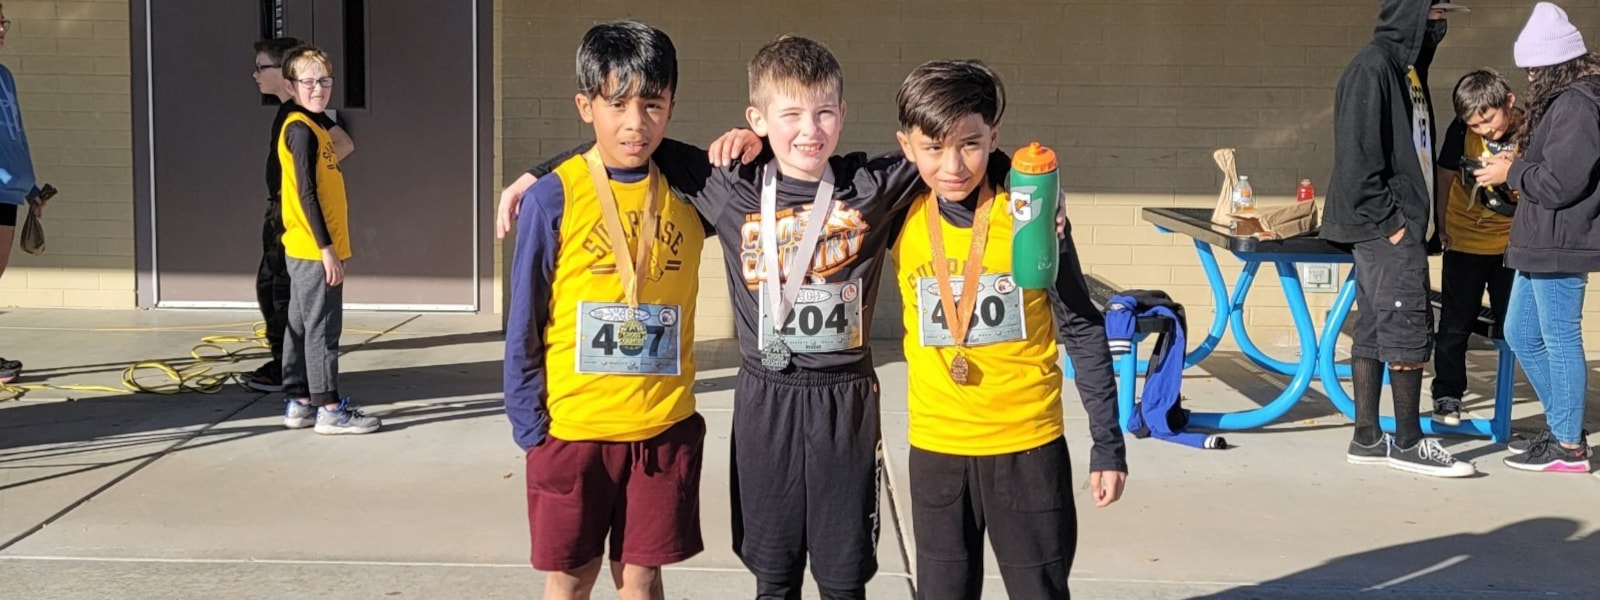 3 students on the cross country team.